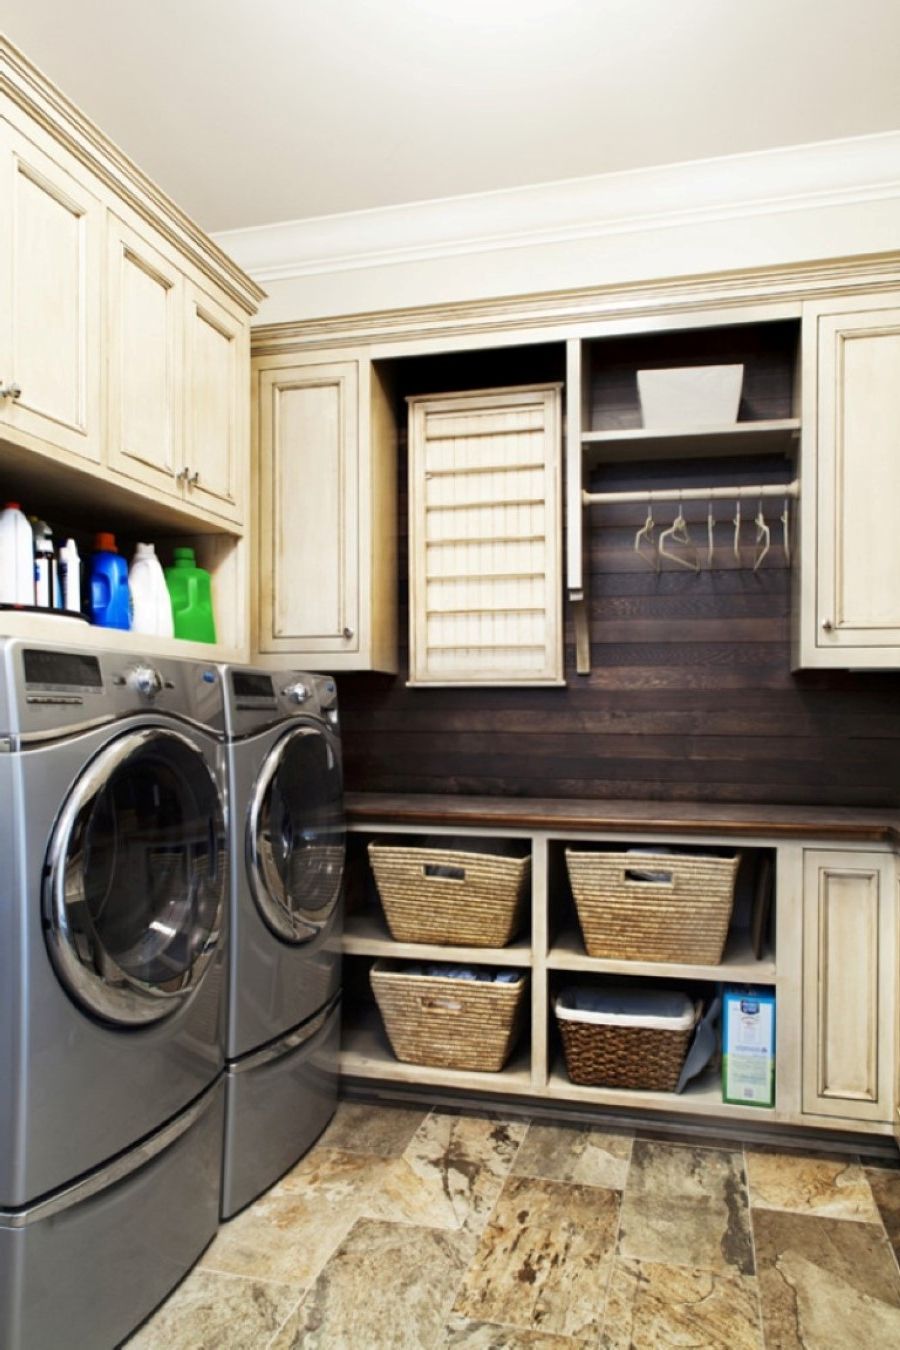 Nice Stoned Floor Tile With White Wooden Laundry Room Storages Design Plus Silver Washing Machines (Photo 2471 of 7825)